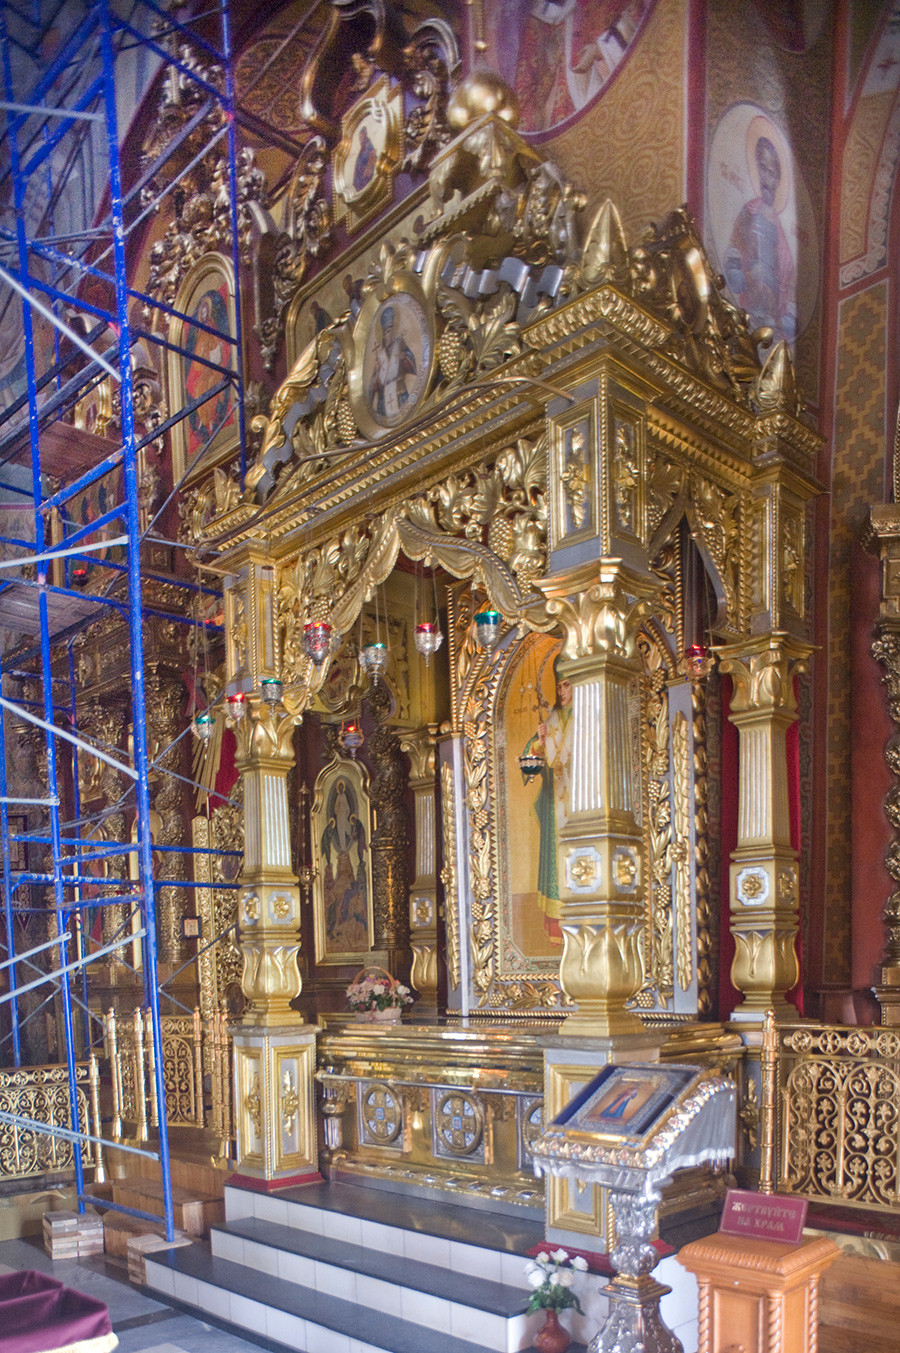 Cathedral of the Transfiguration, baldacchino with relics of St. Ioasaph, Bishop of Belgorod ( relics transferred from museum in 1991). June 24, 2015